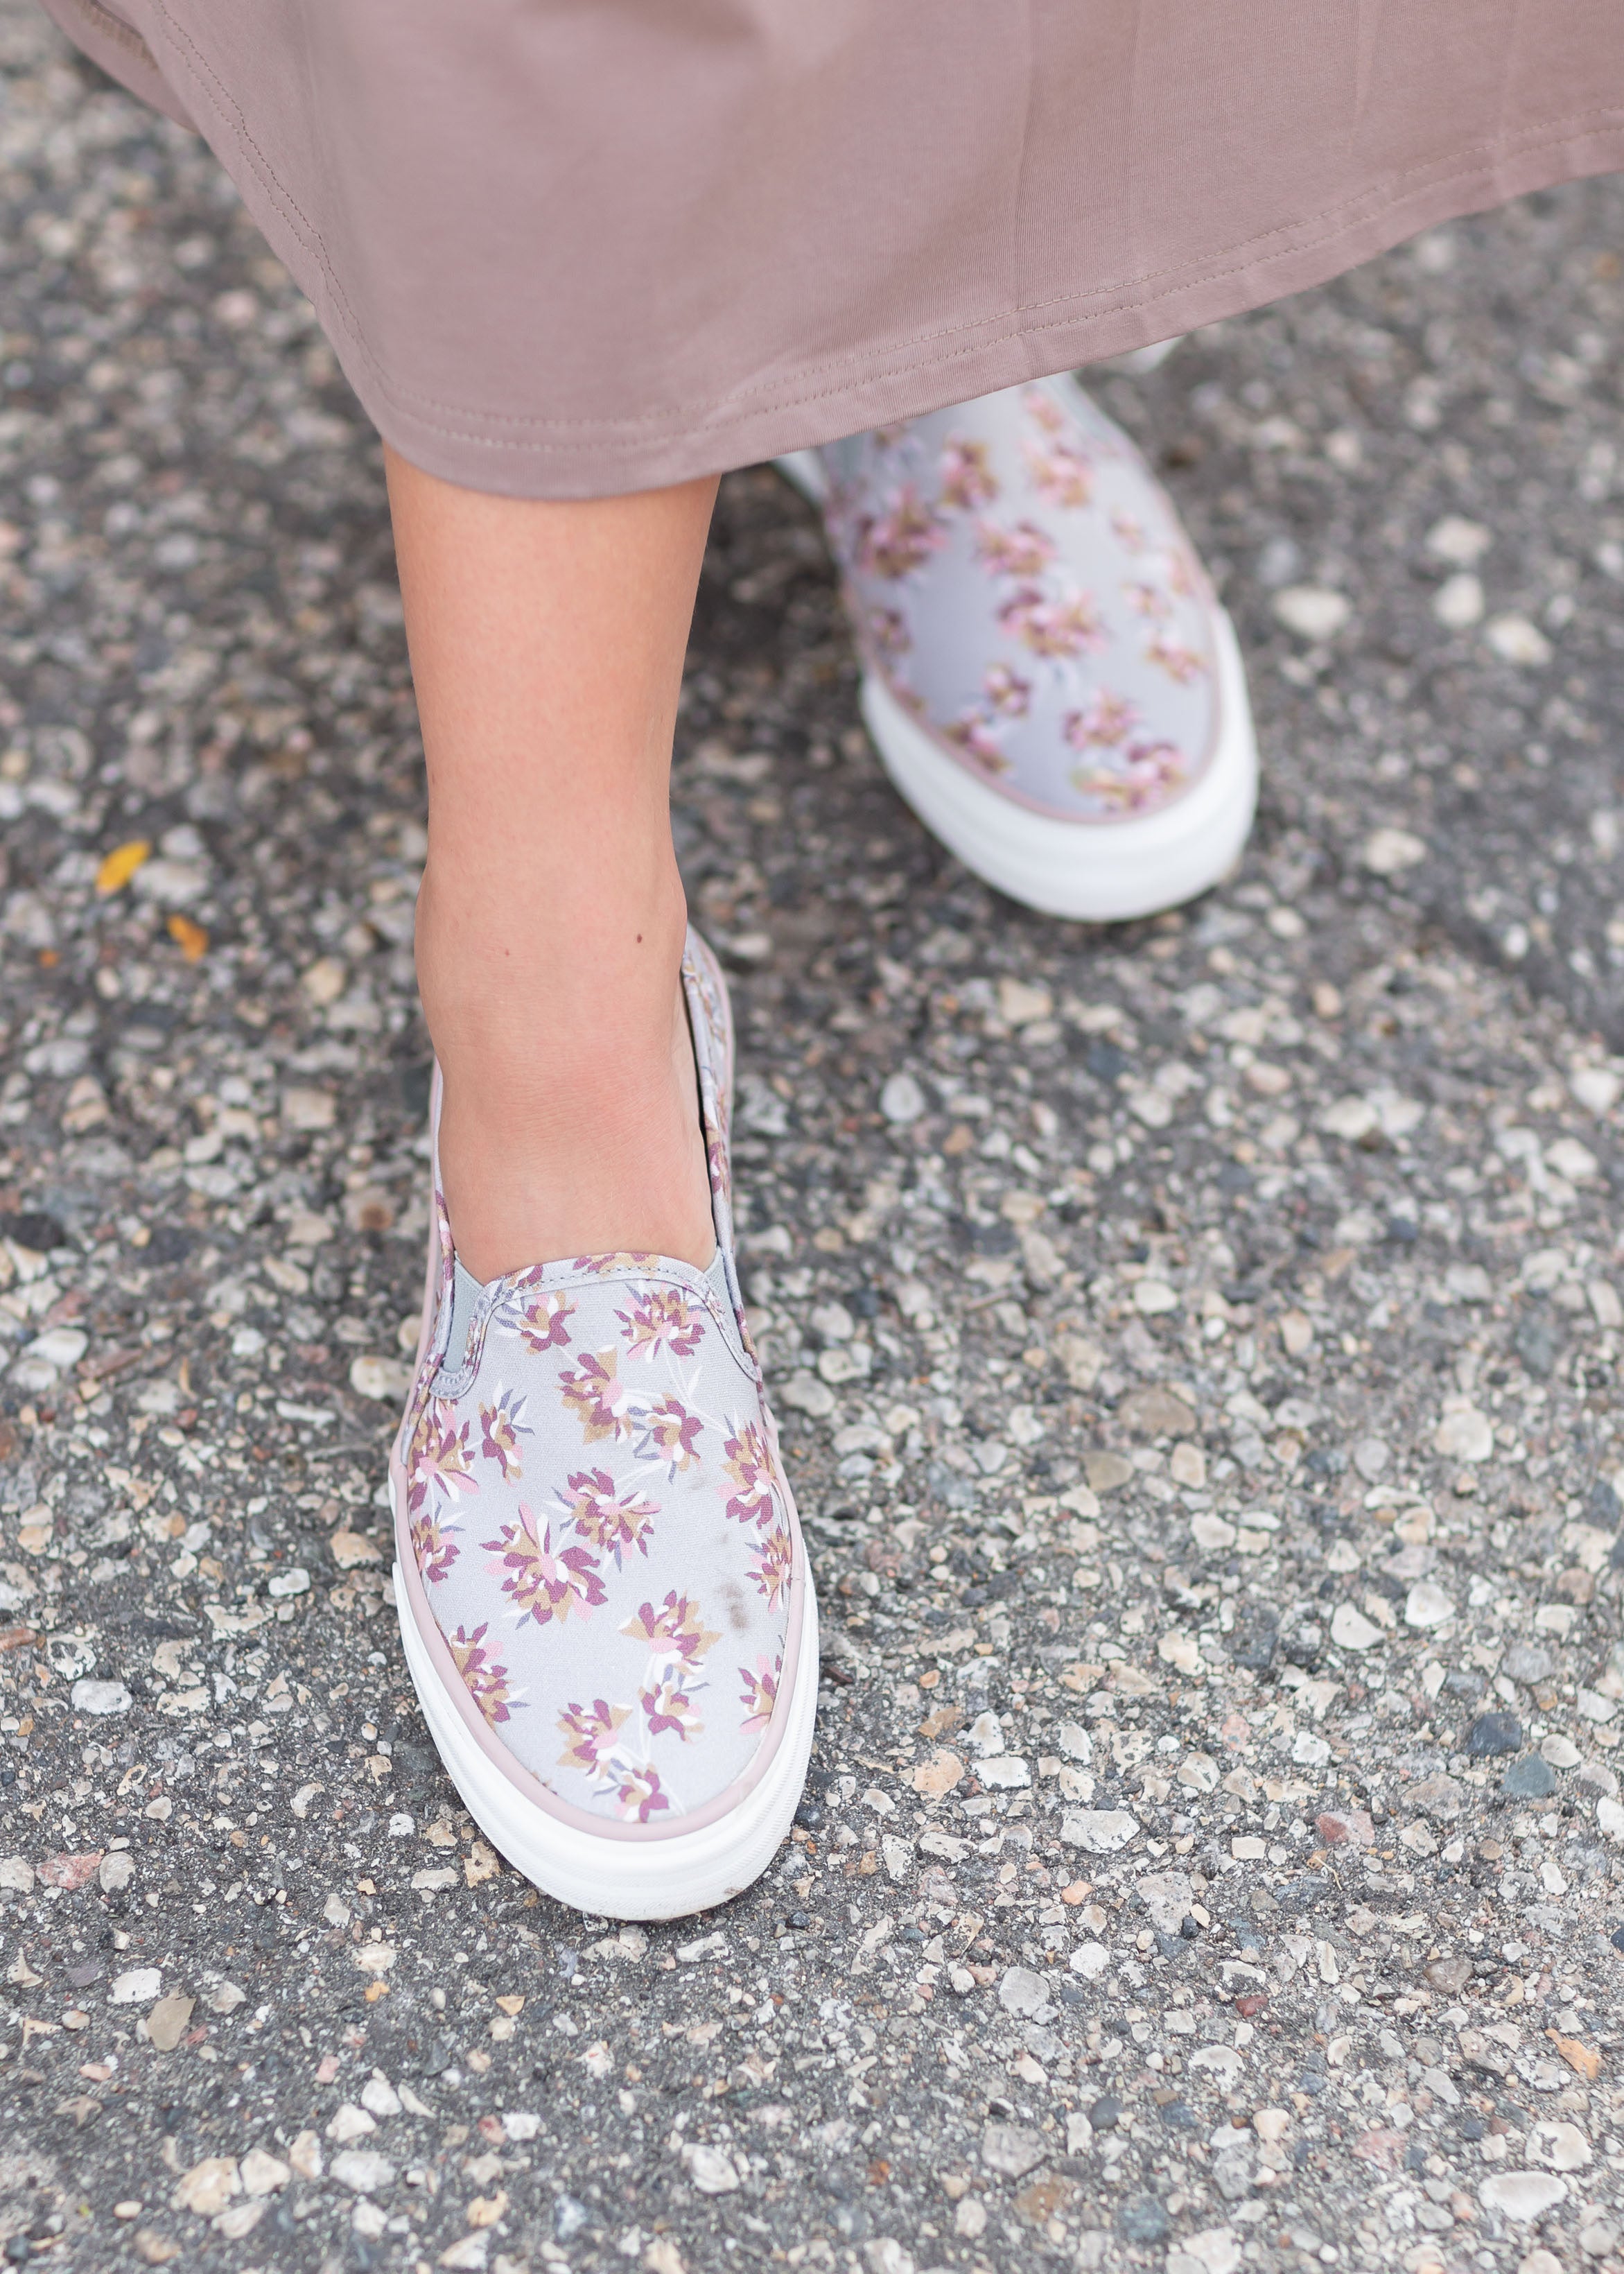 Easter Weekend Style: Floral Sneakers - OTBT shoes